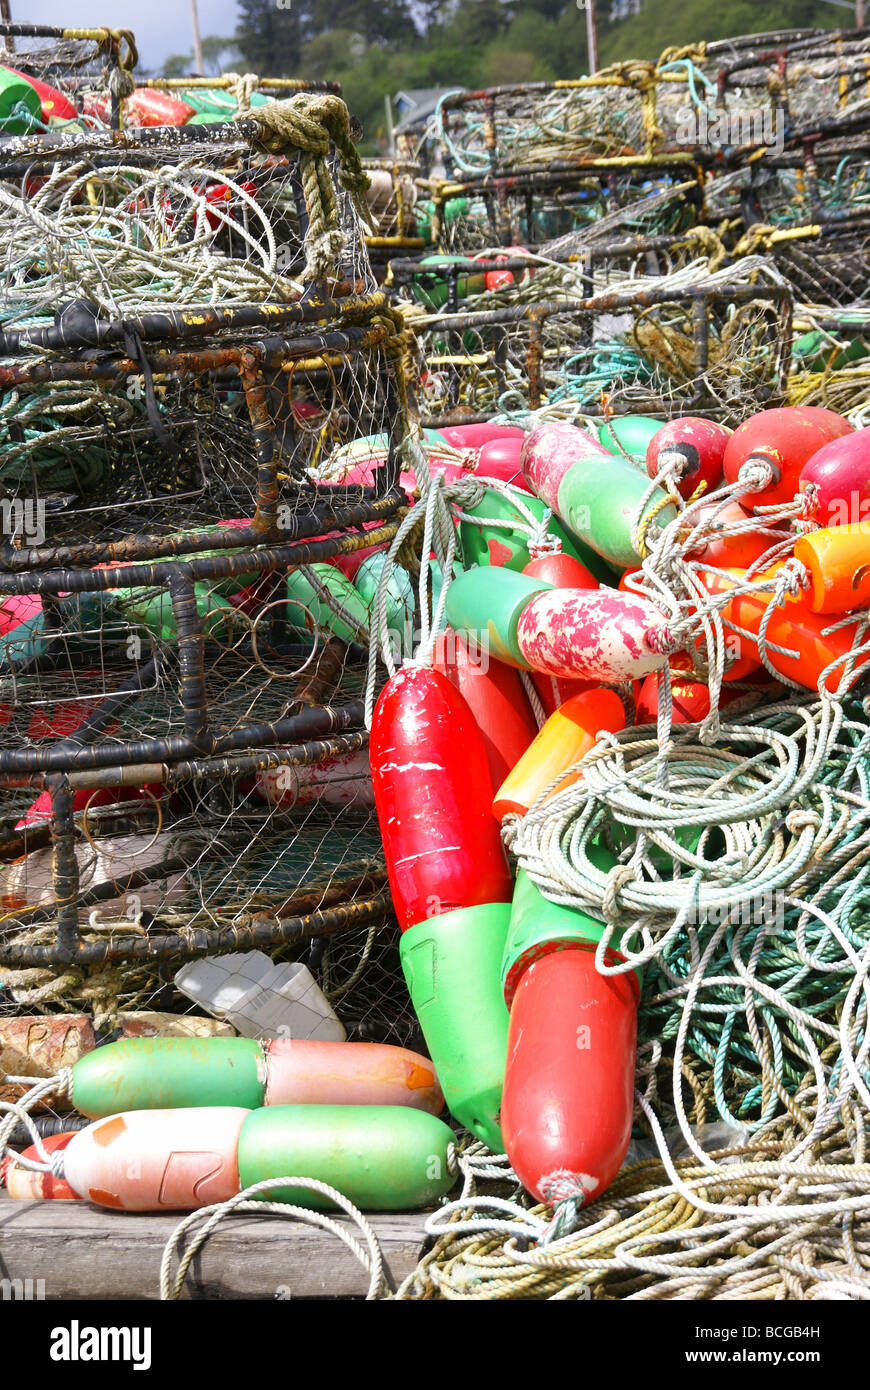 https://c8.alamy.com/comp/BCGB4H/red-and-green-crab-floats-and-crab-traps-drying-on-wharf-newport-oregon-BCGB4H.jpg